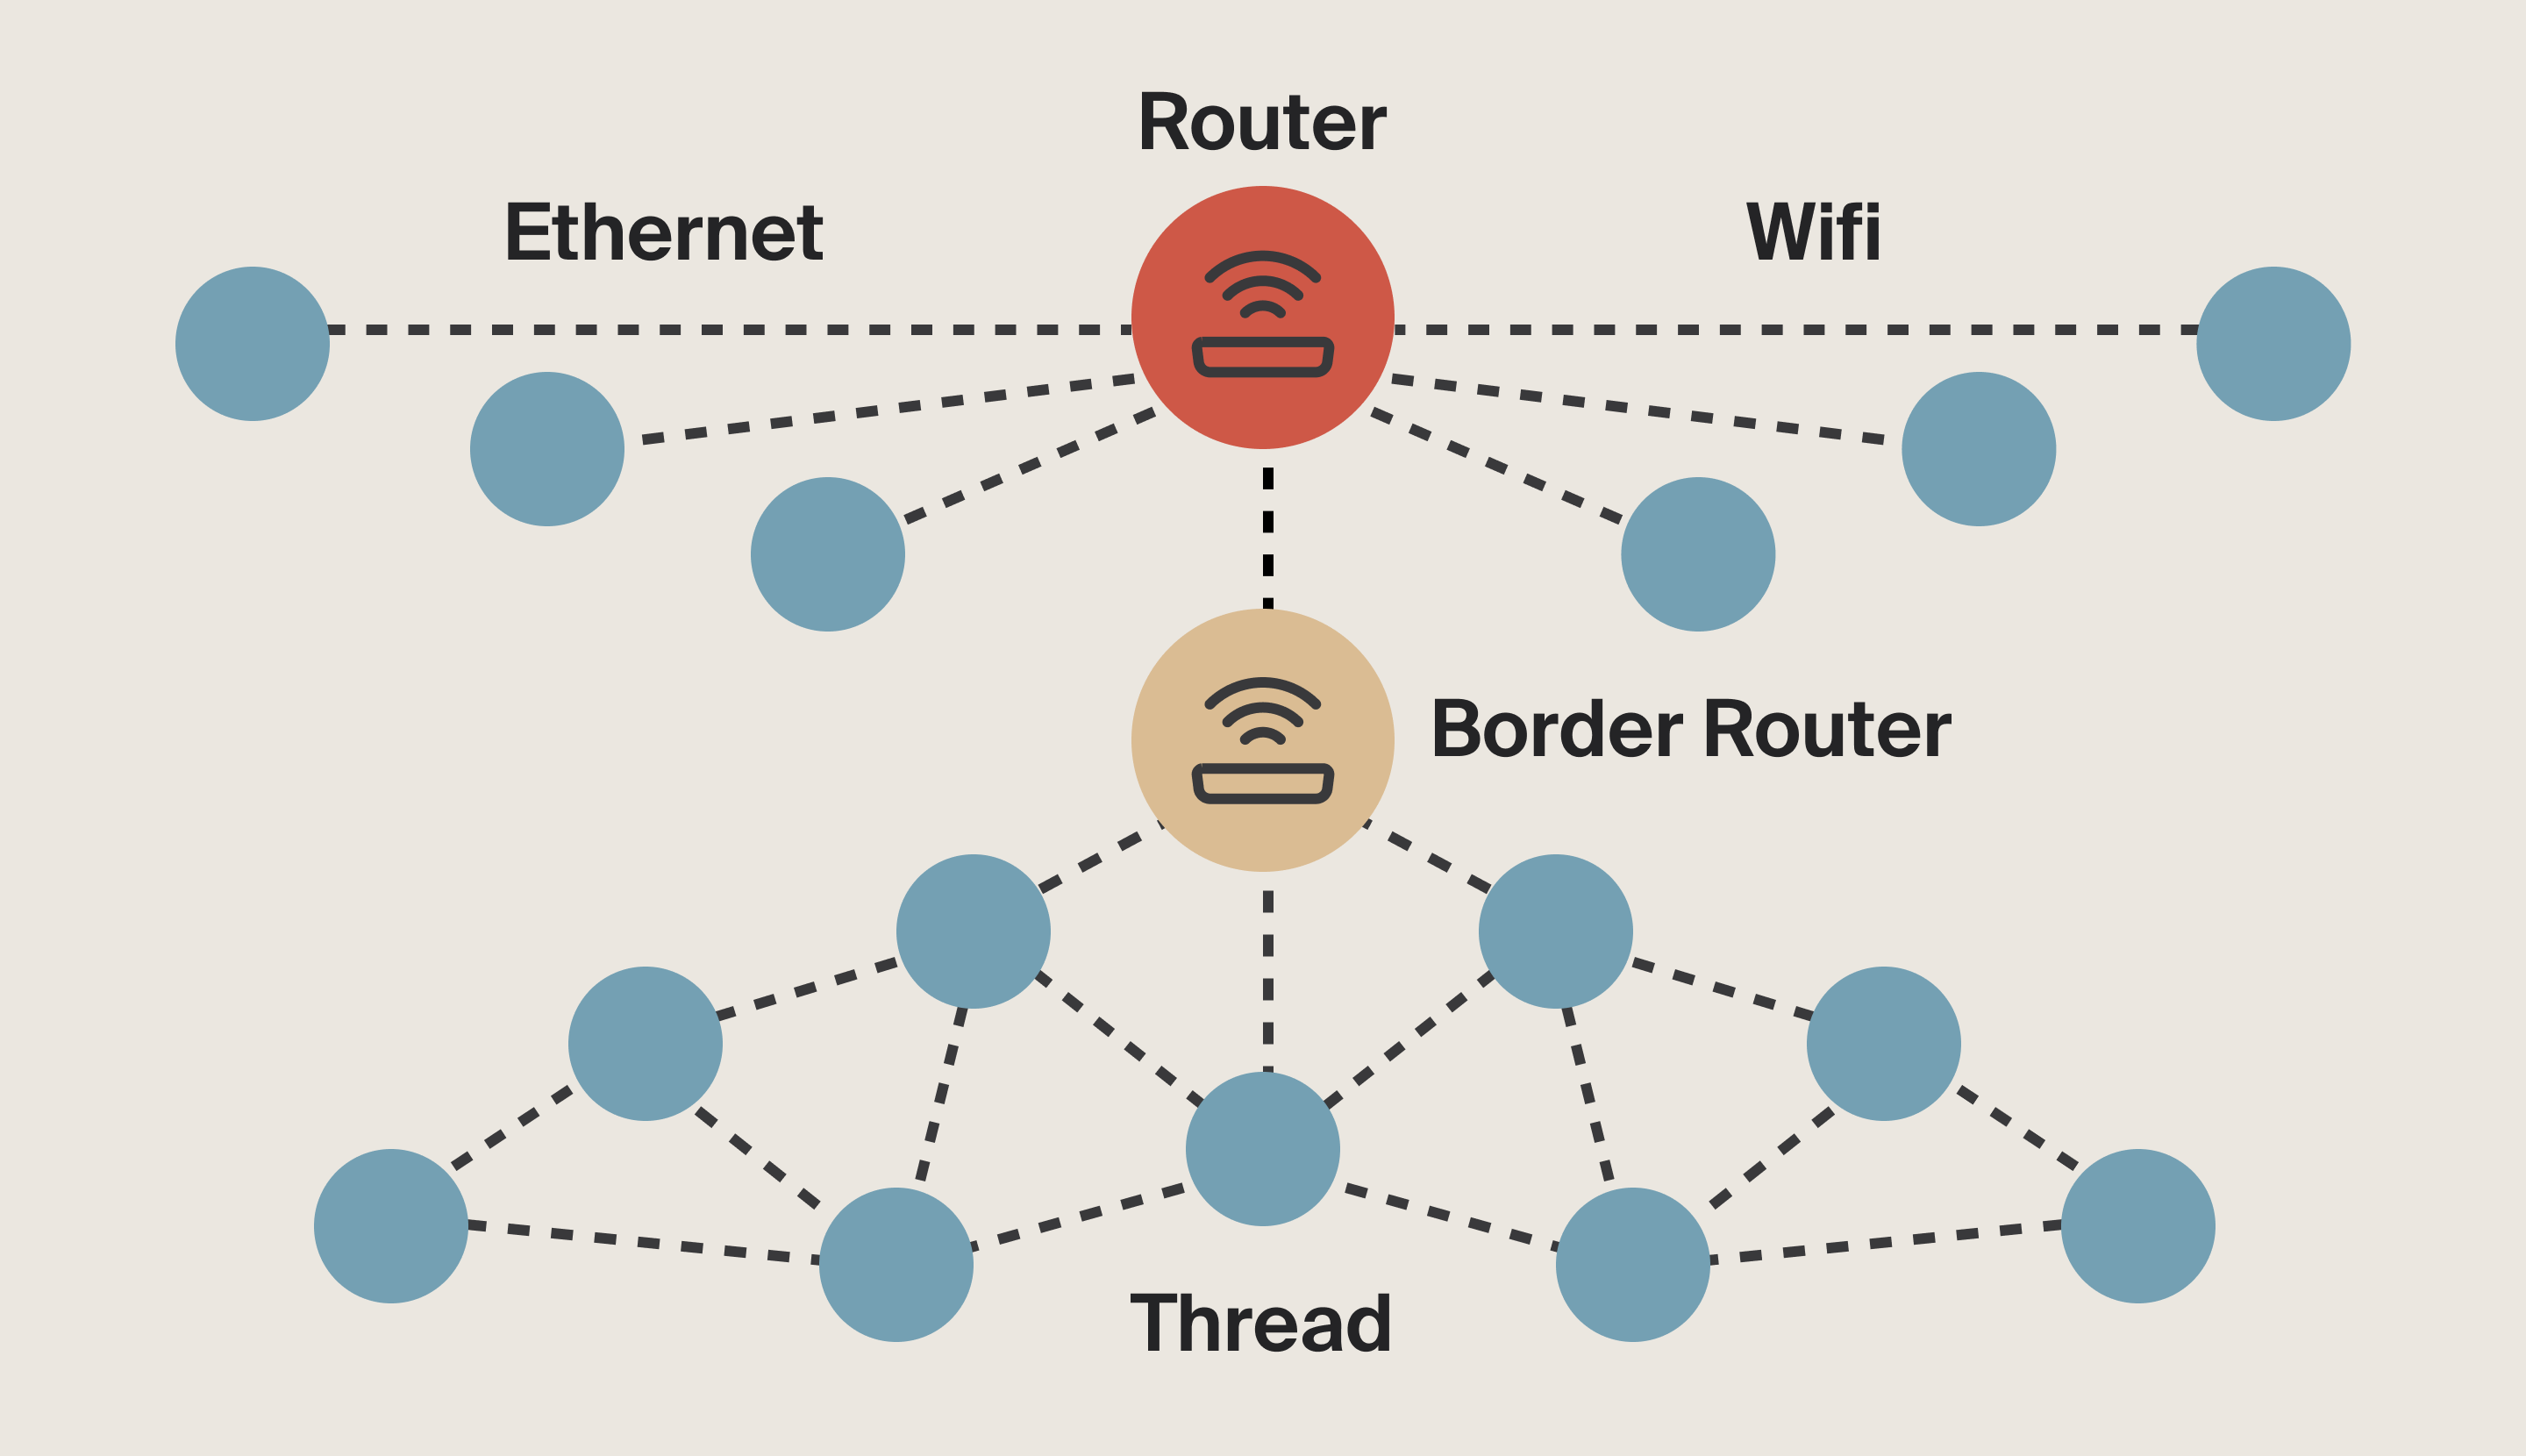 Matter Thread and Border Router